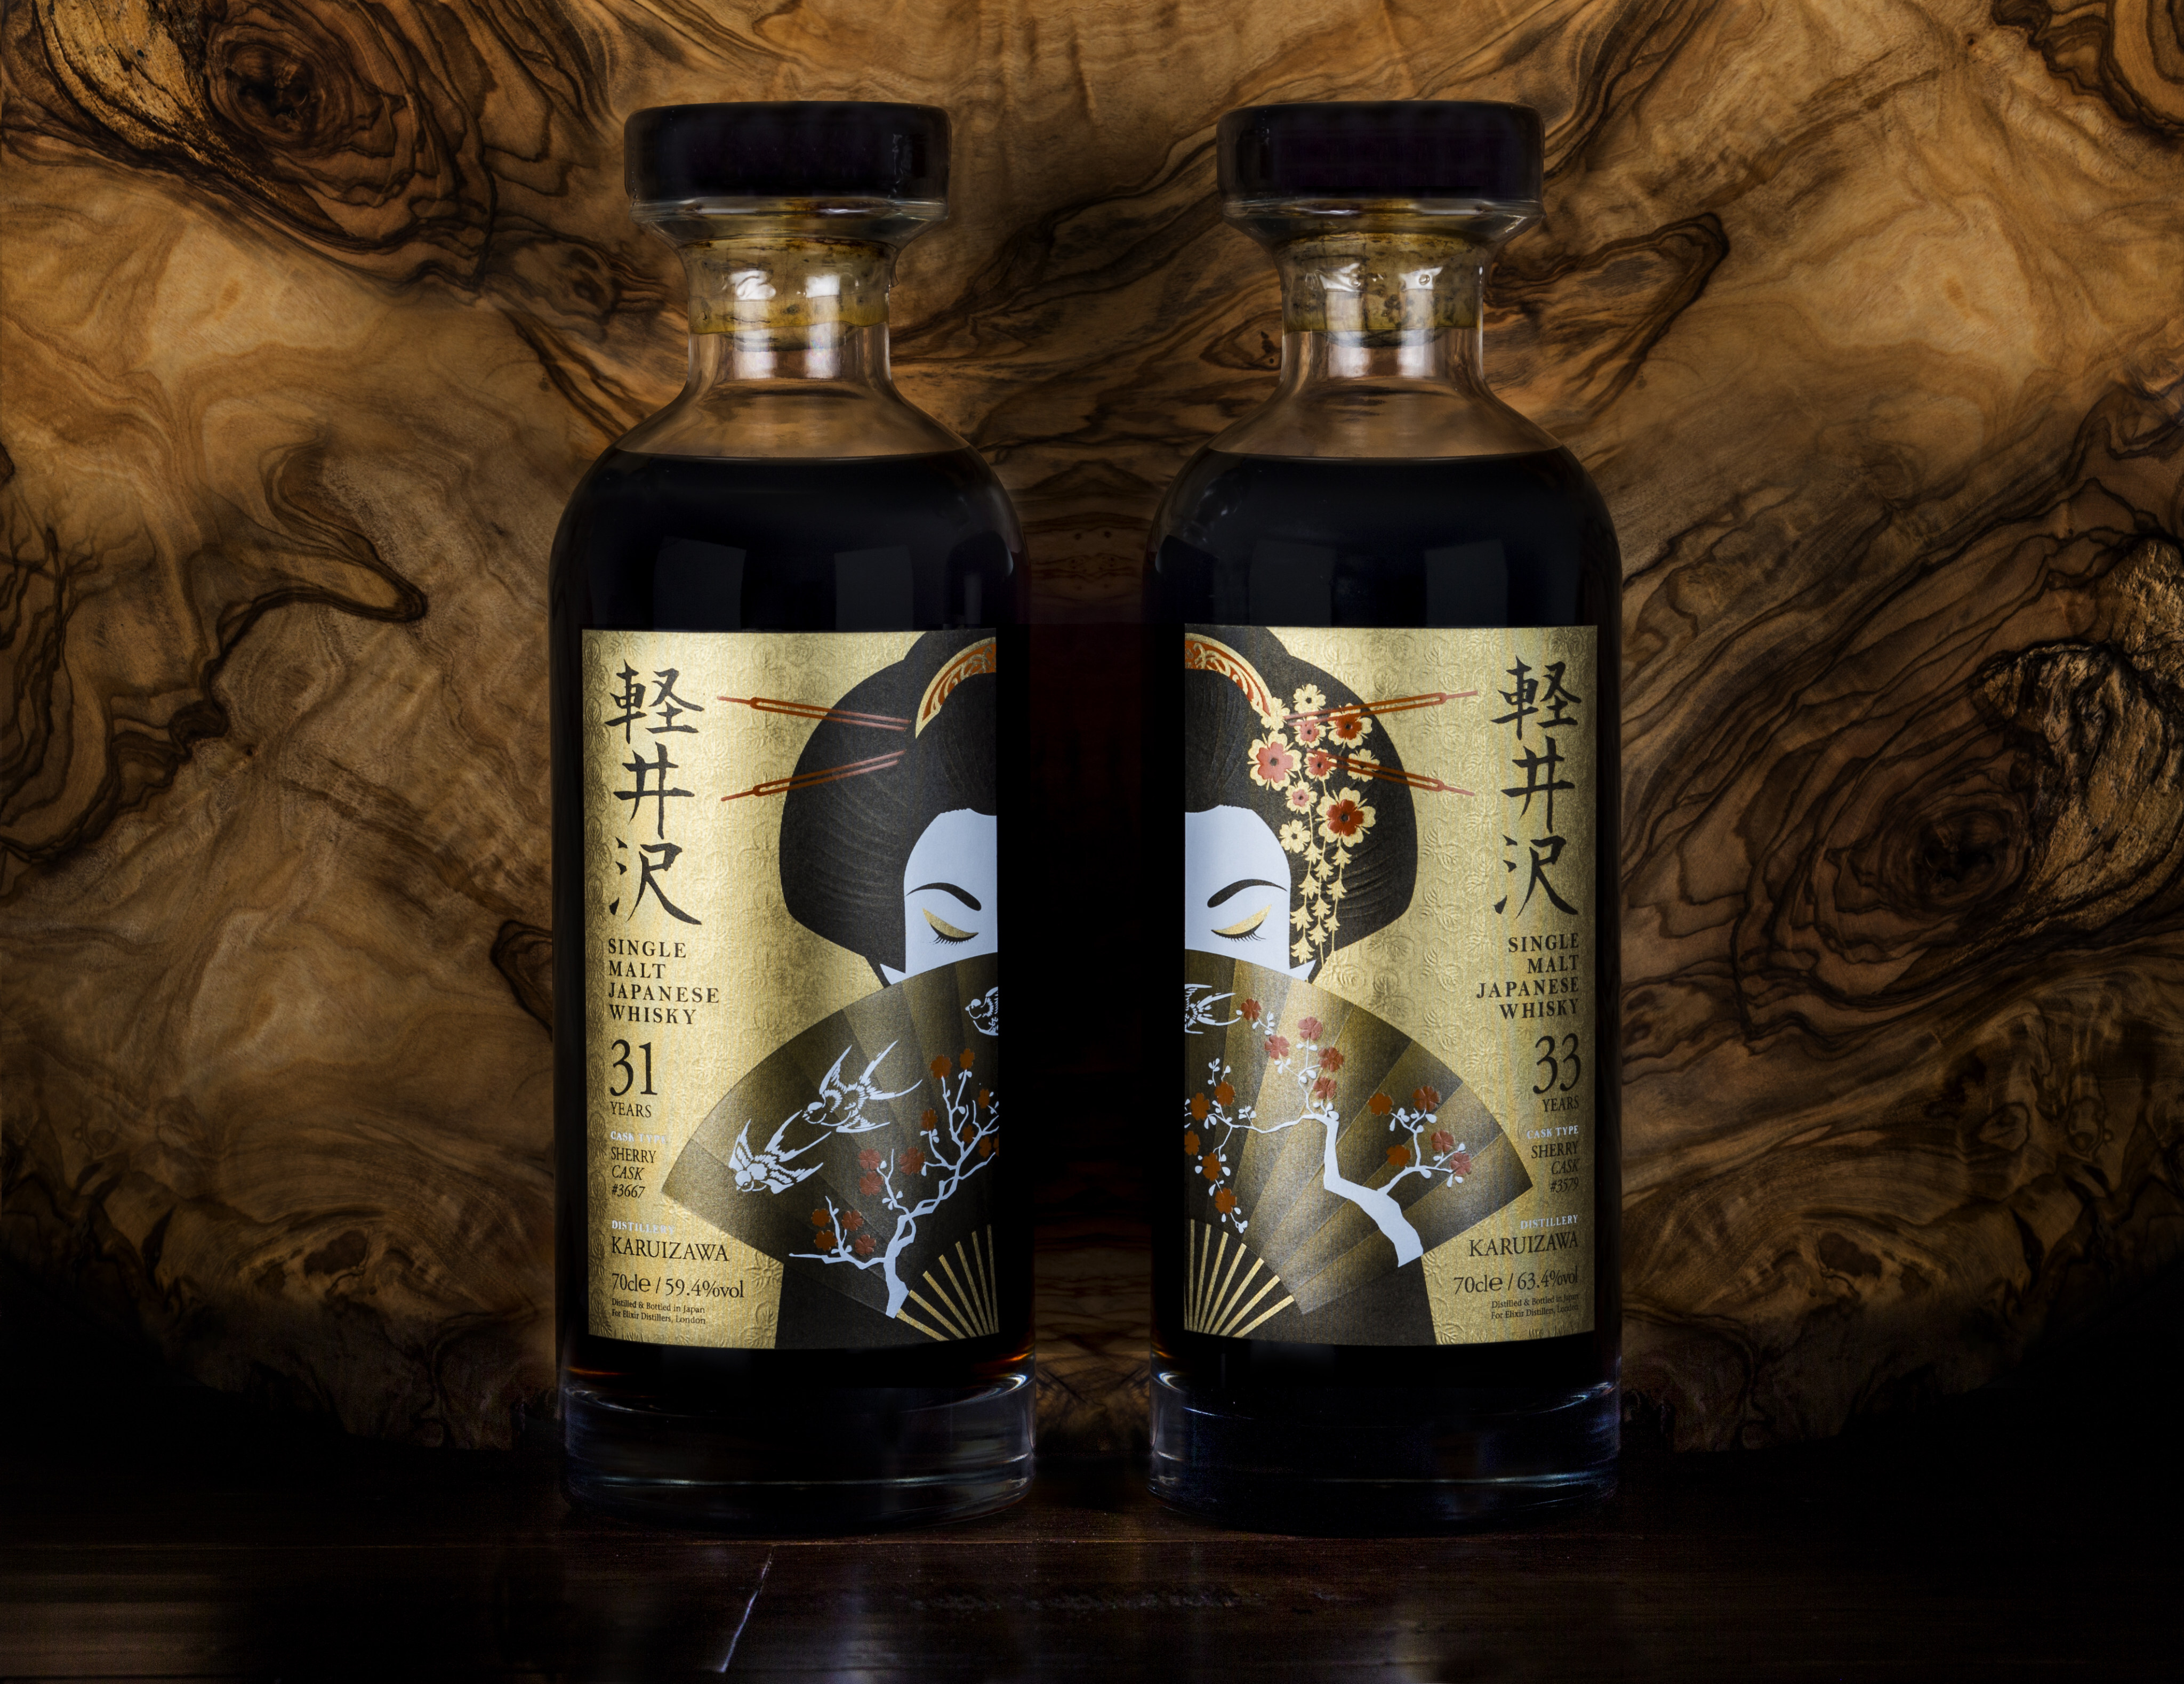 Karuizawa, one of Japan’s most famous whiskies, is one example of a distiller producing series of bottles to appeal to the growing collector’s market. Photo: Karuizawa